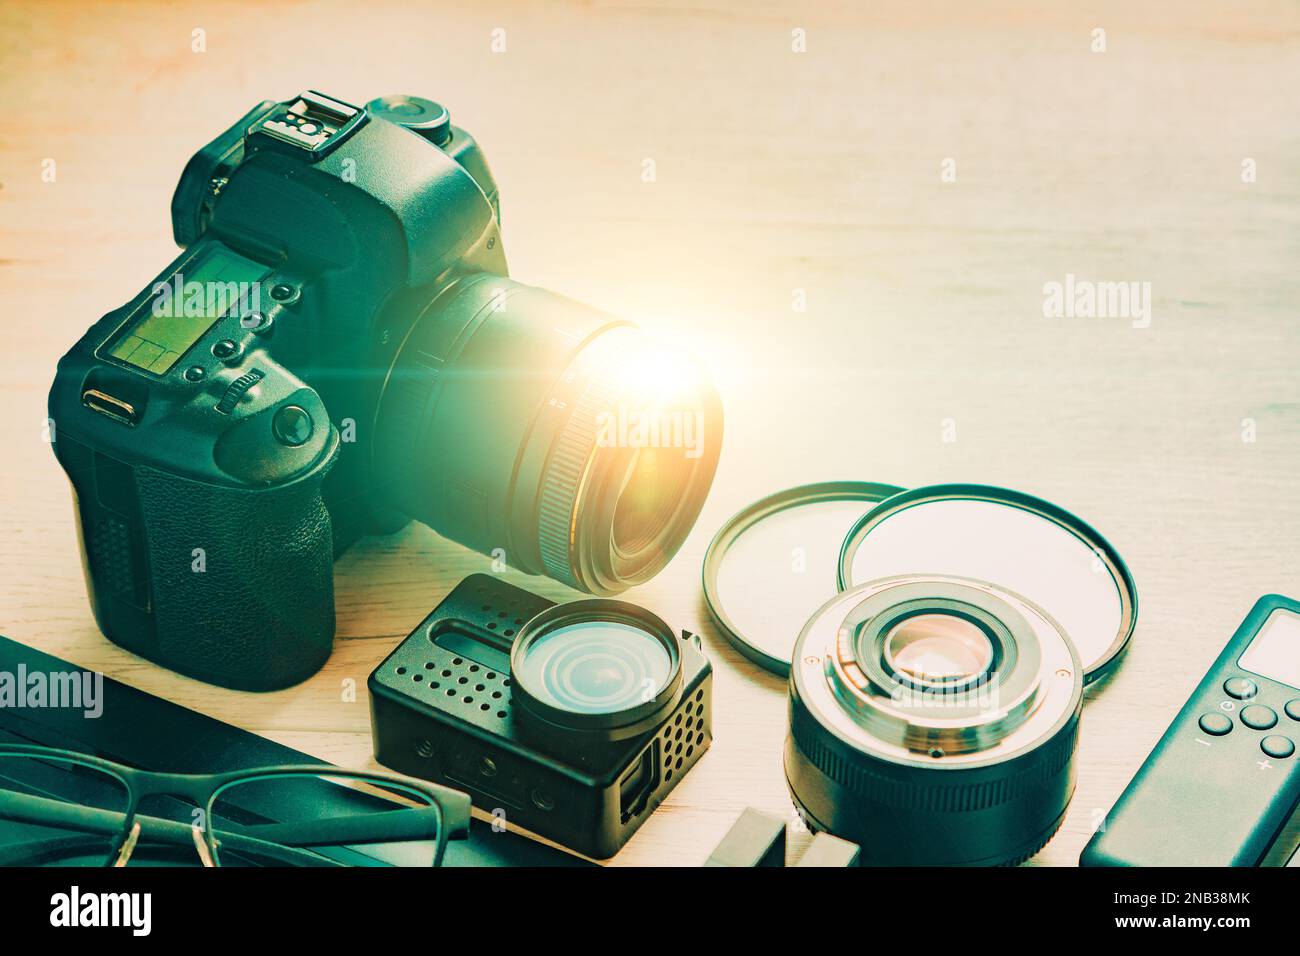 Digital photo workstation over black background.Top view of  digital camera, flash,lens and laptop.Professional Photographic Equipment. Stock Photo